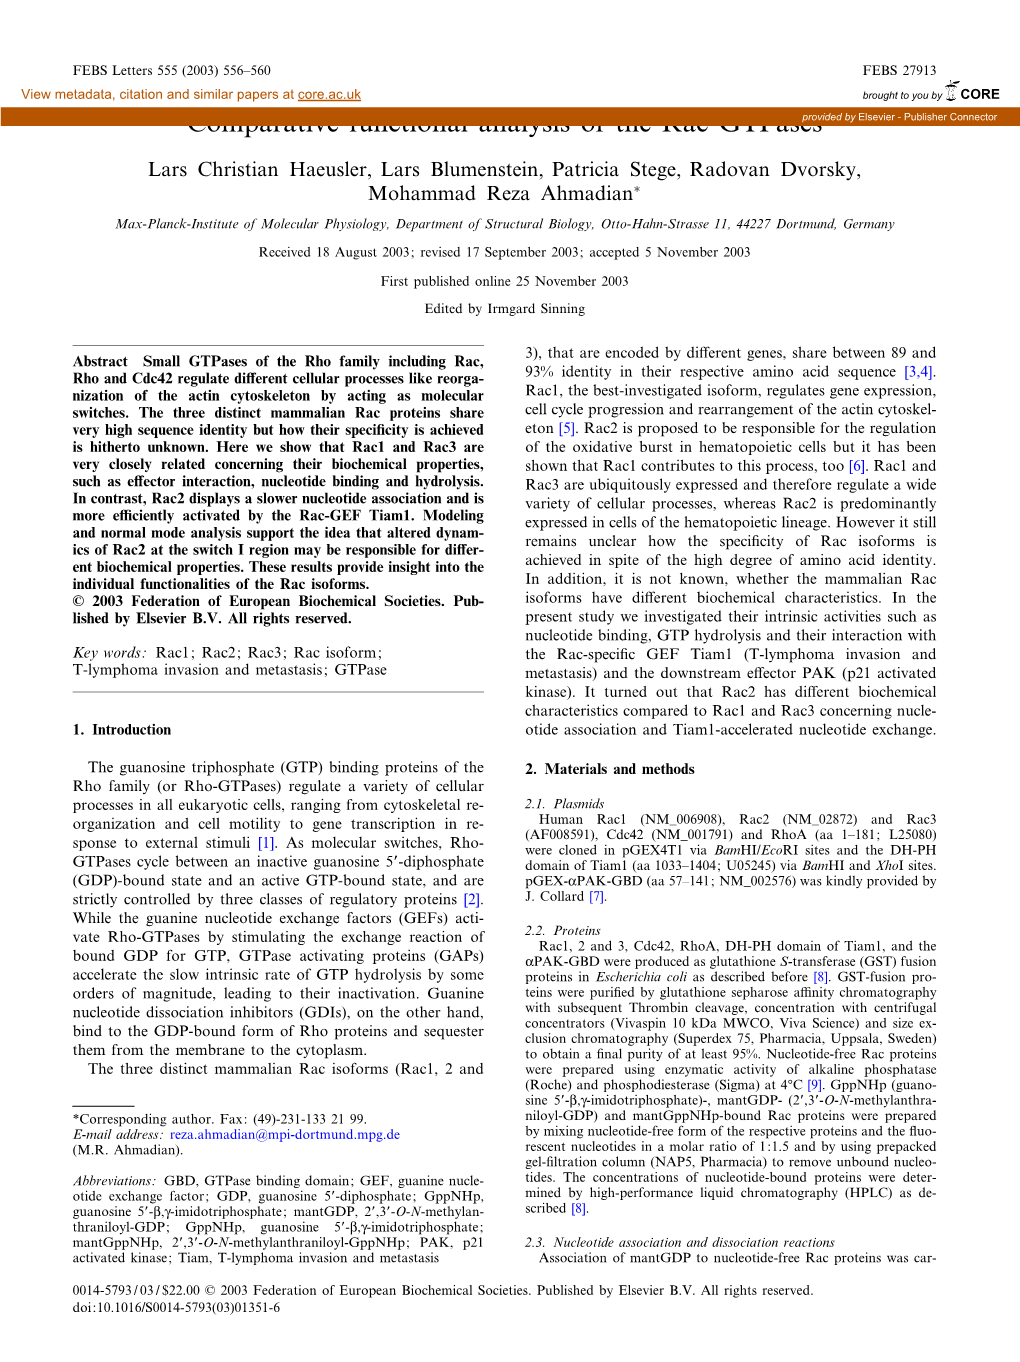 Comparative Functional Analysis of the Rac Gtpasesprovided by Elsevier - Publisher Connector